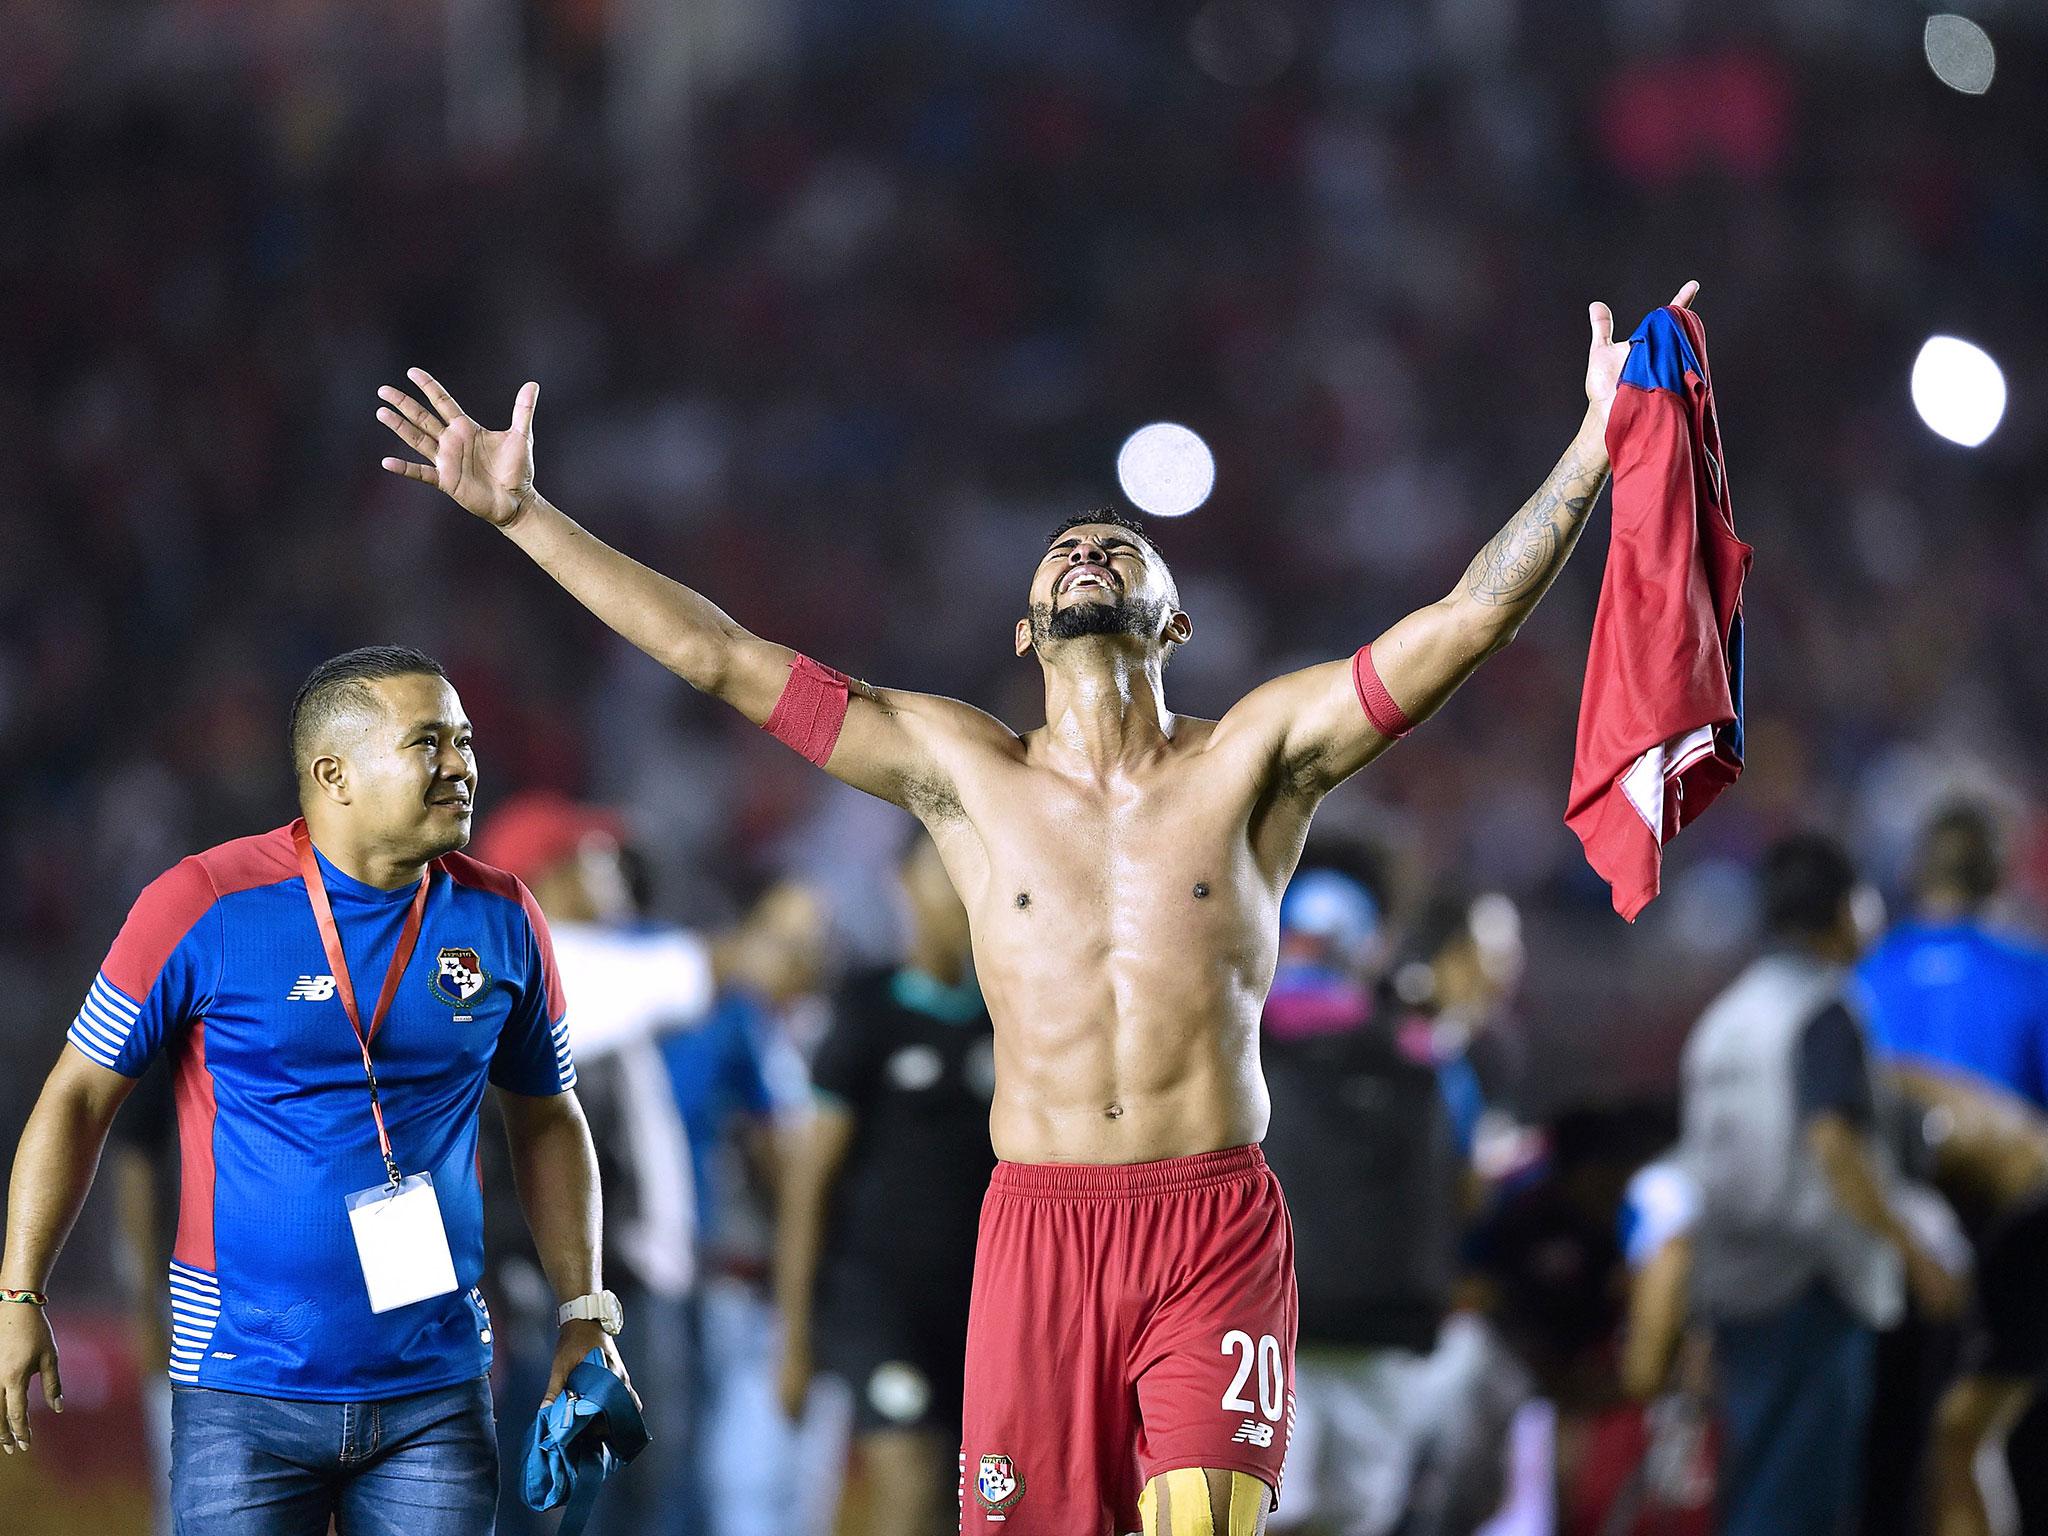 Panama's 2-1 victory over Costa Rica will live long in the memory